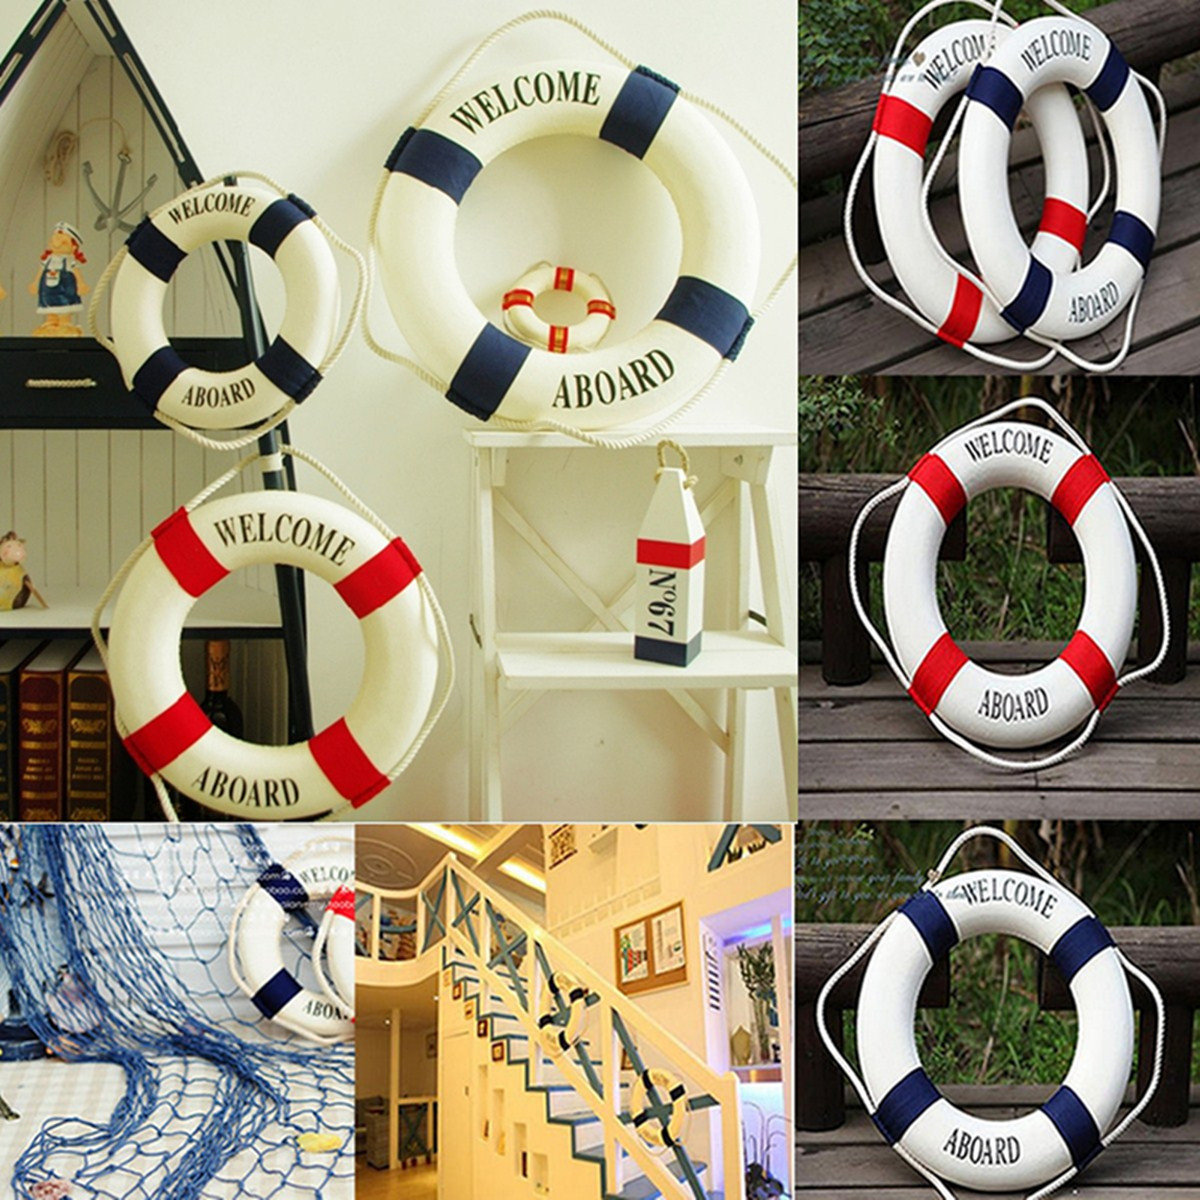 

Mediterranean Style Welcome Aboard Decorative Life Buoy Home Decor, Red cm blue cm